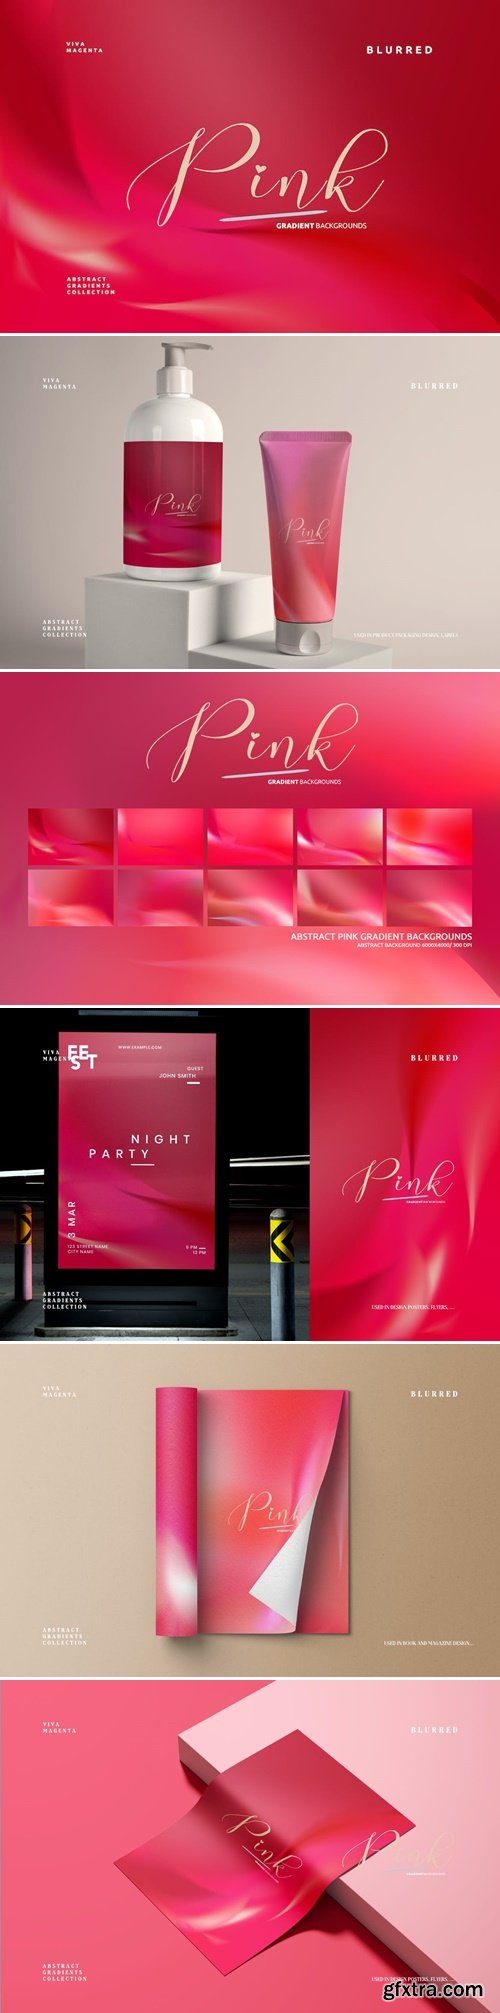 Abstract Pink Gradient Backgrounds YGNLX23